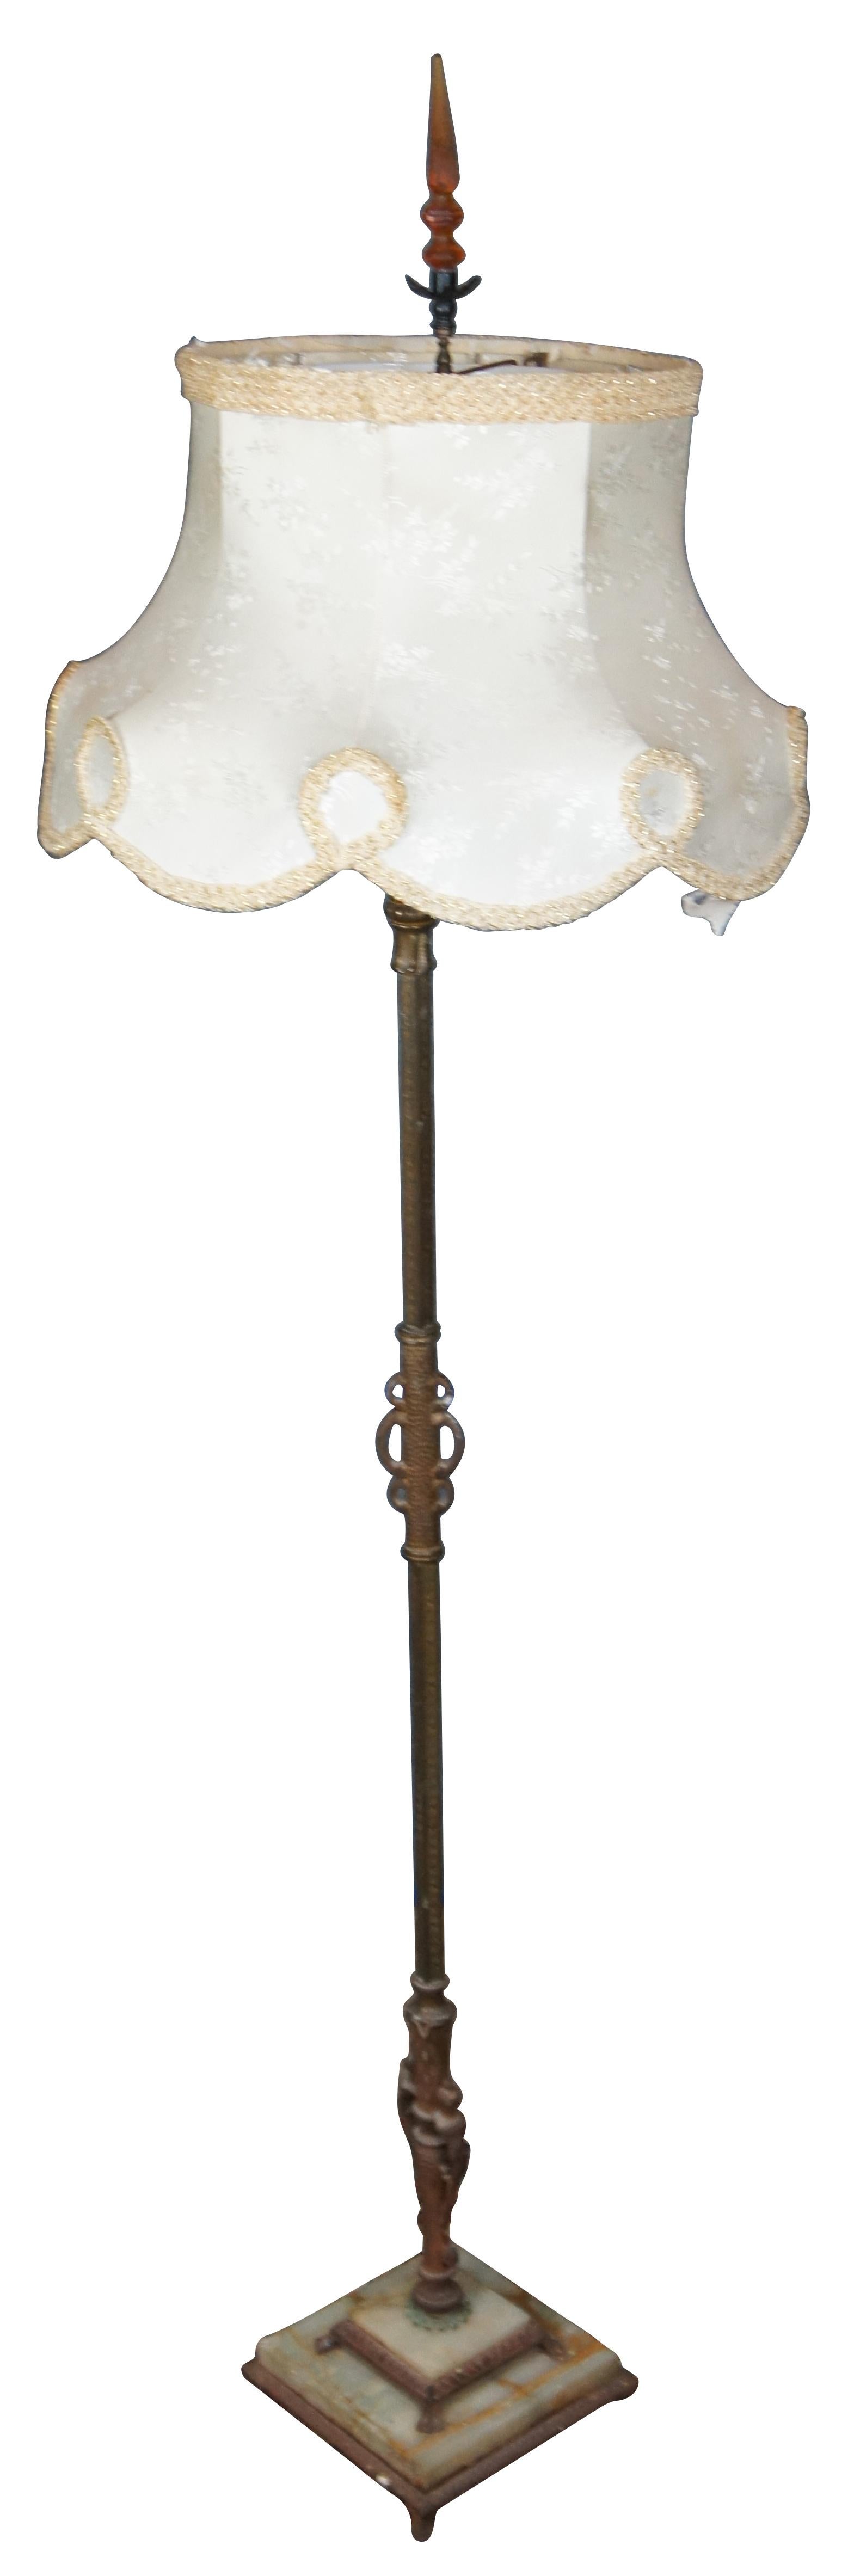 Late 19th-early 20th century large floor lamp with an iron and white marble base, brass body with candelabra sockets for three candle shaped bulbs and main torchiere style top with milk glass shade, all topped with a scalloped silk shade with amber